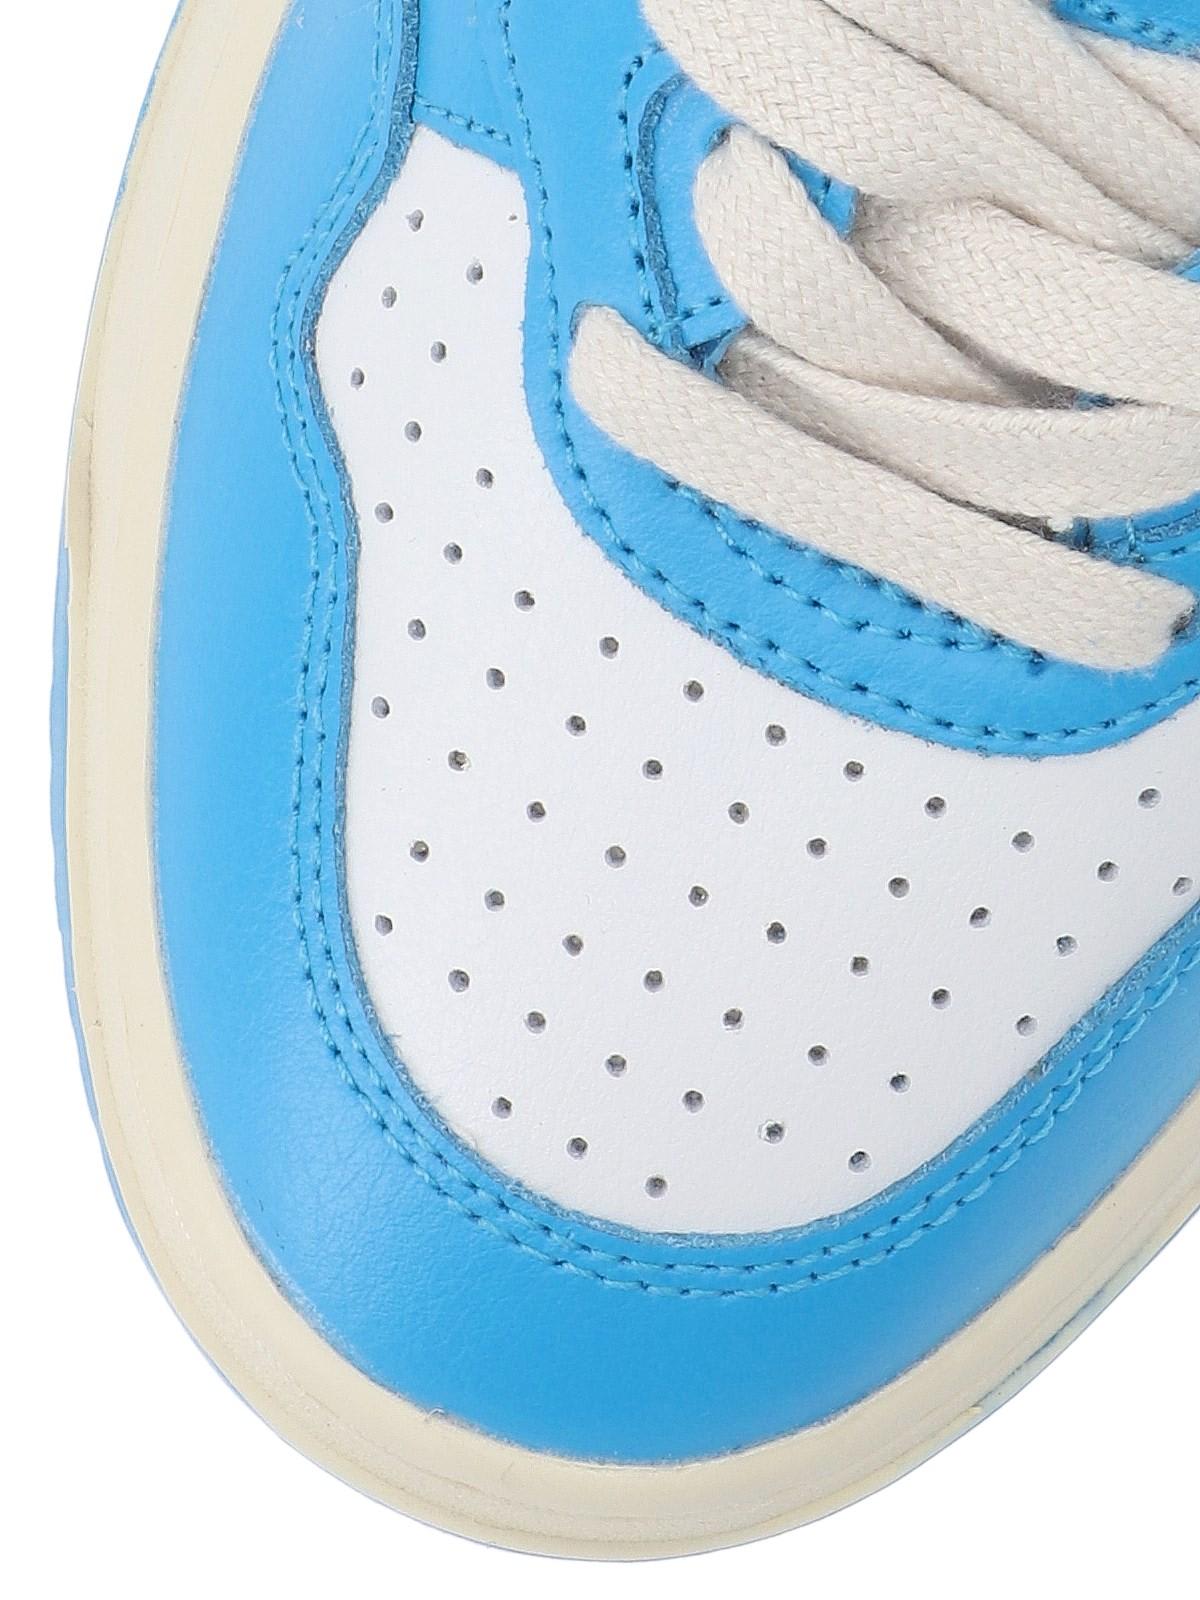 Shop Autry Low Sneakers Medalist In Blue/white